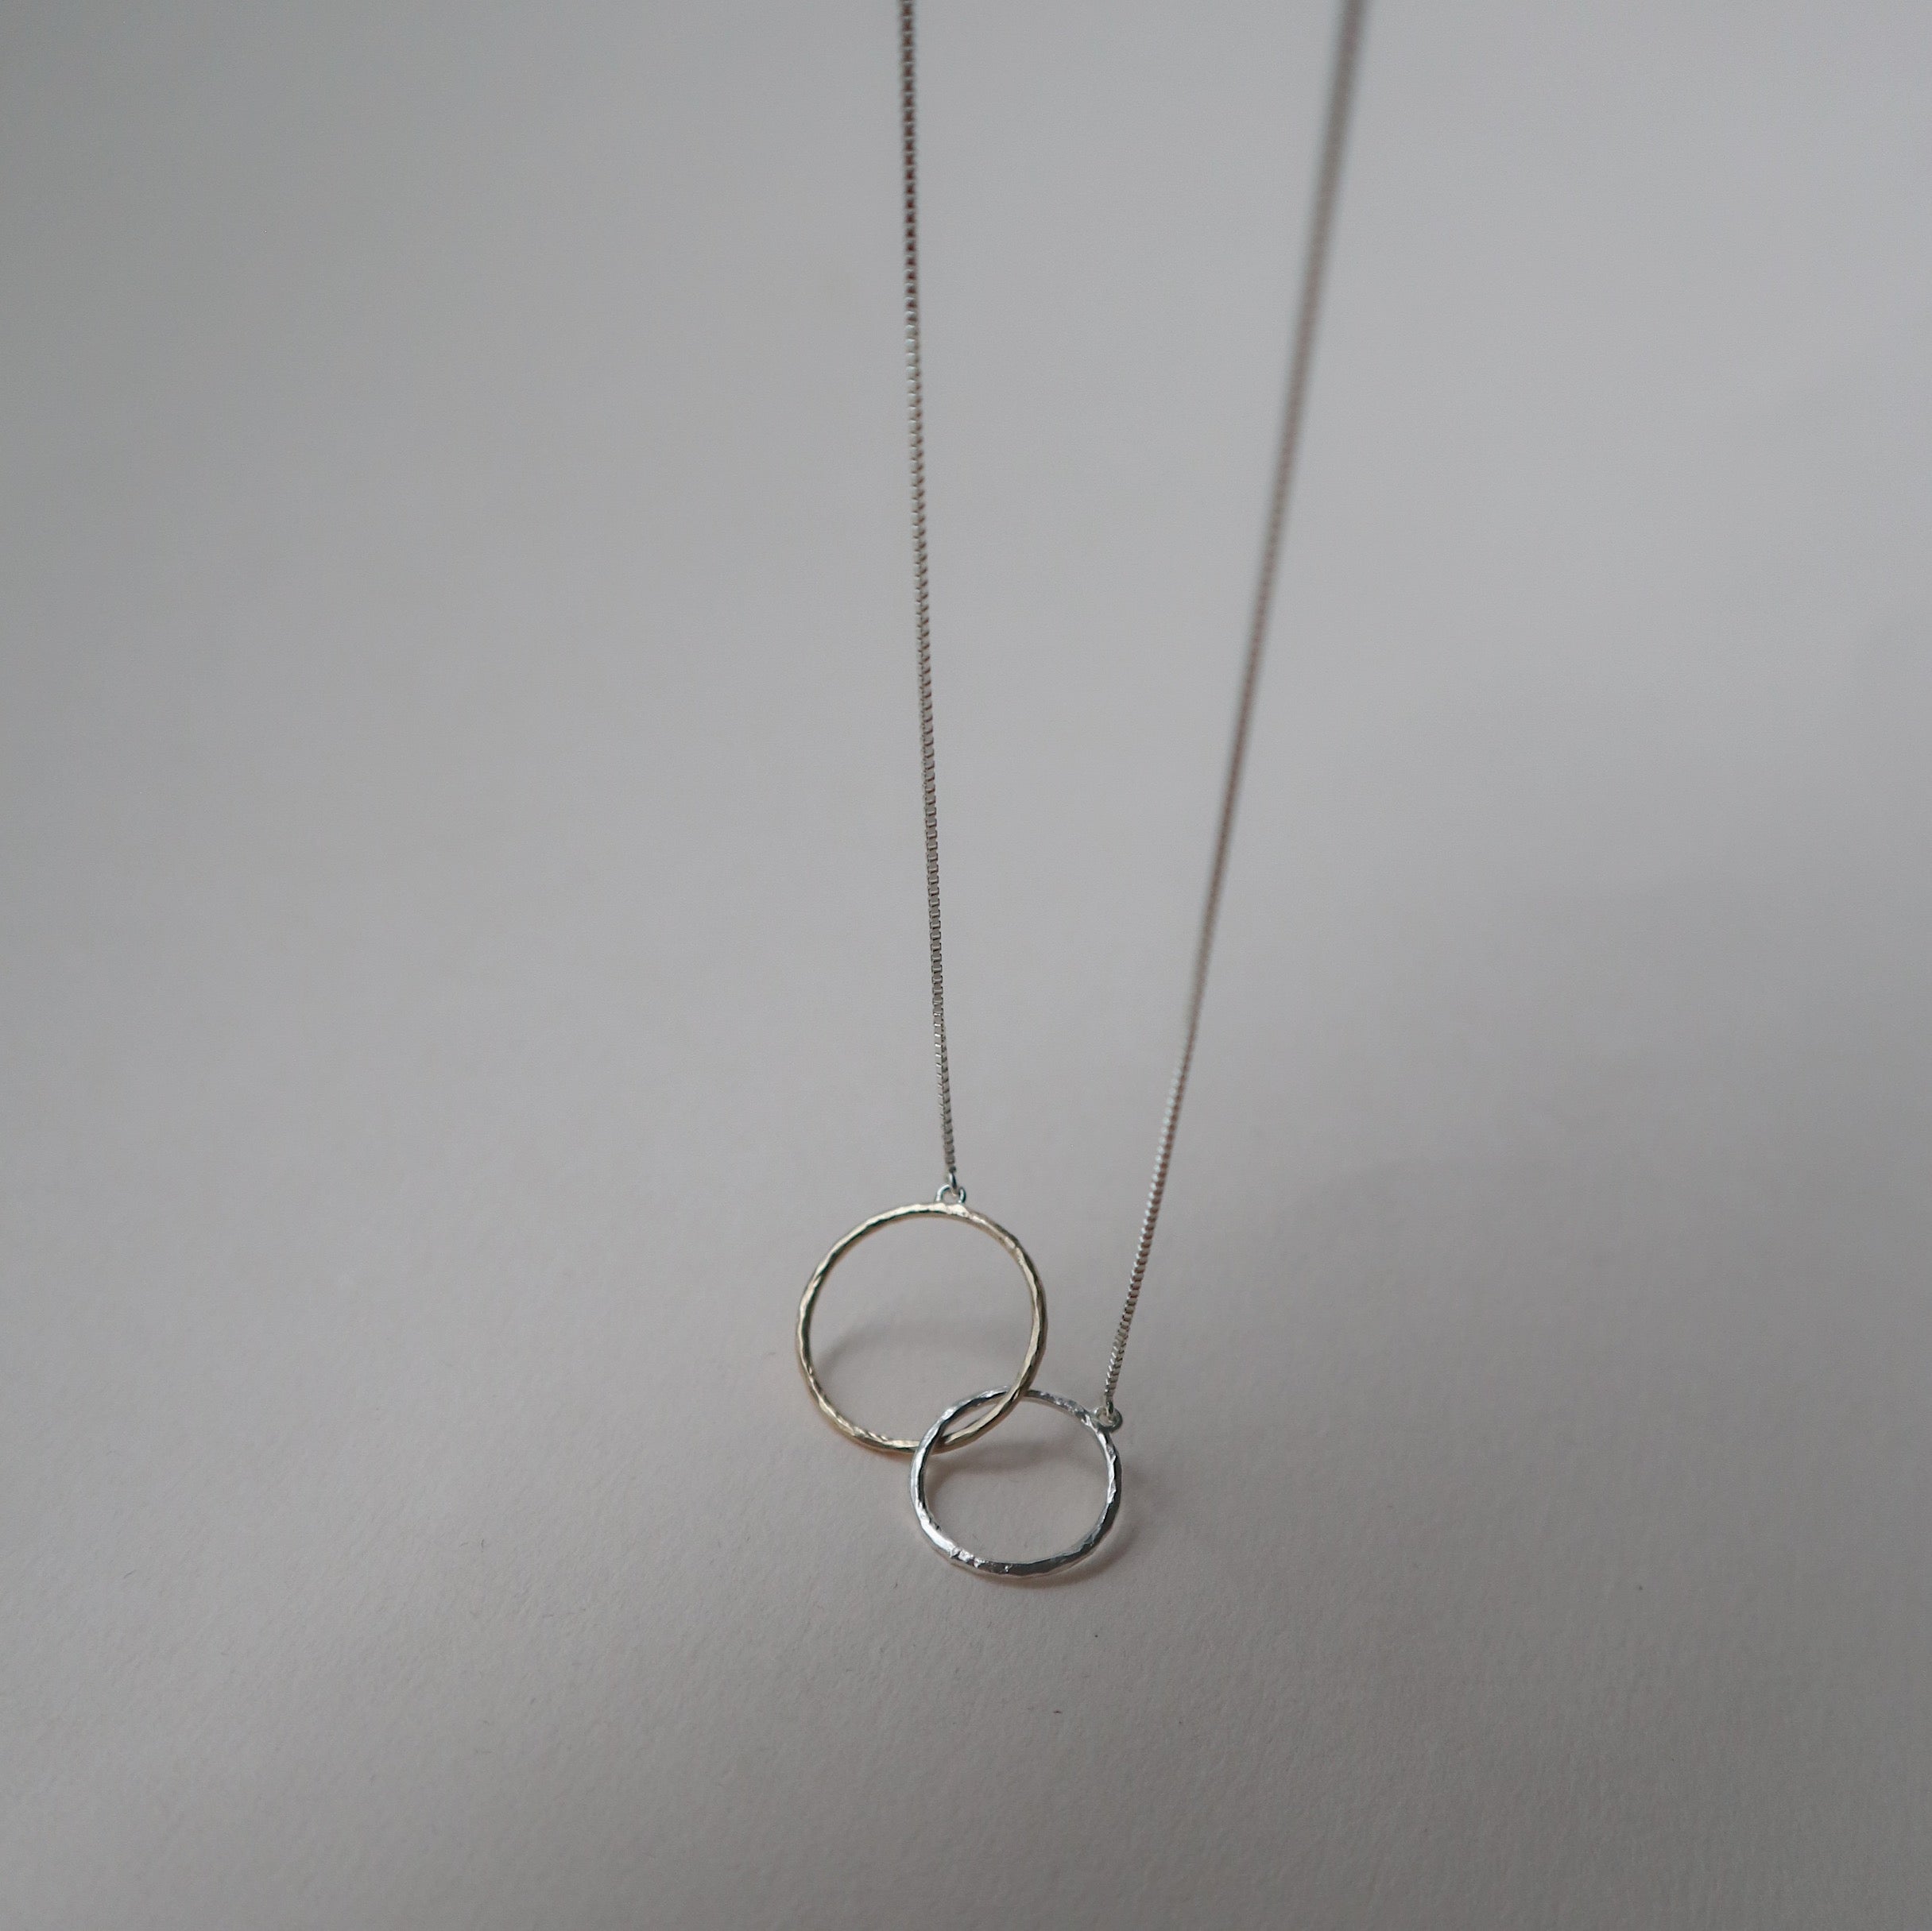 'Eclectic Elska' Infinity Necklace Interlocking Circles | 9k Gold & Sterling Silver